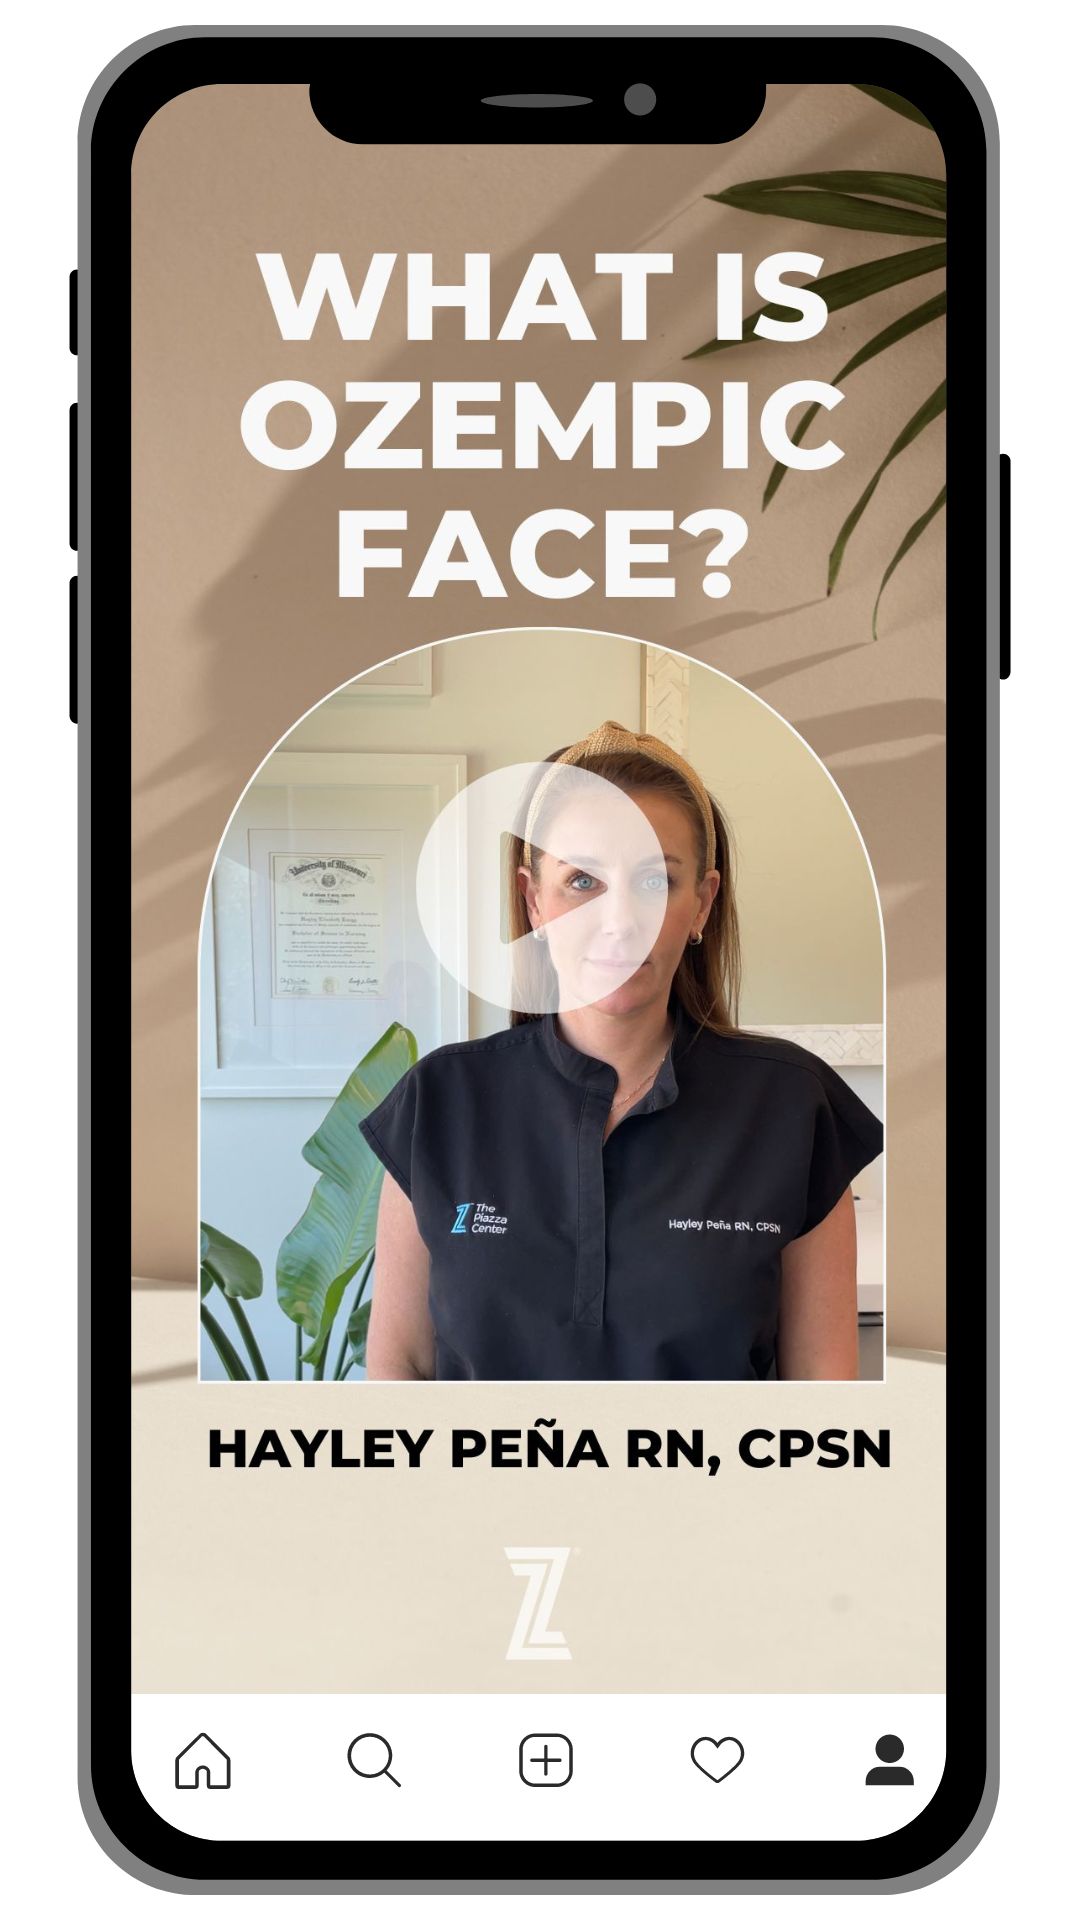 Video discussing what ozempic face is